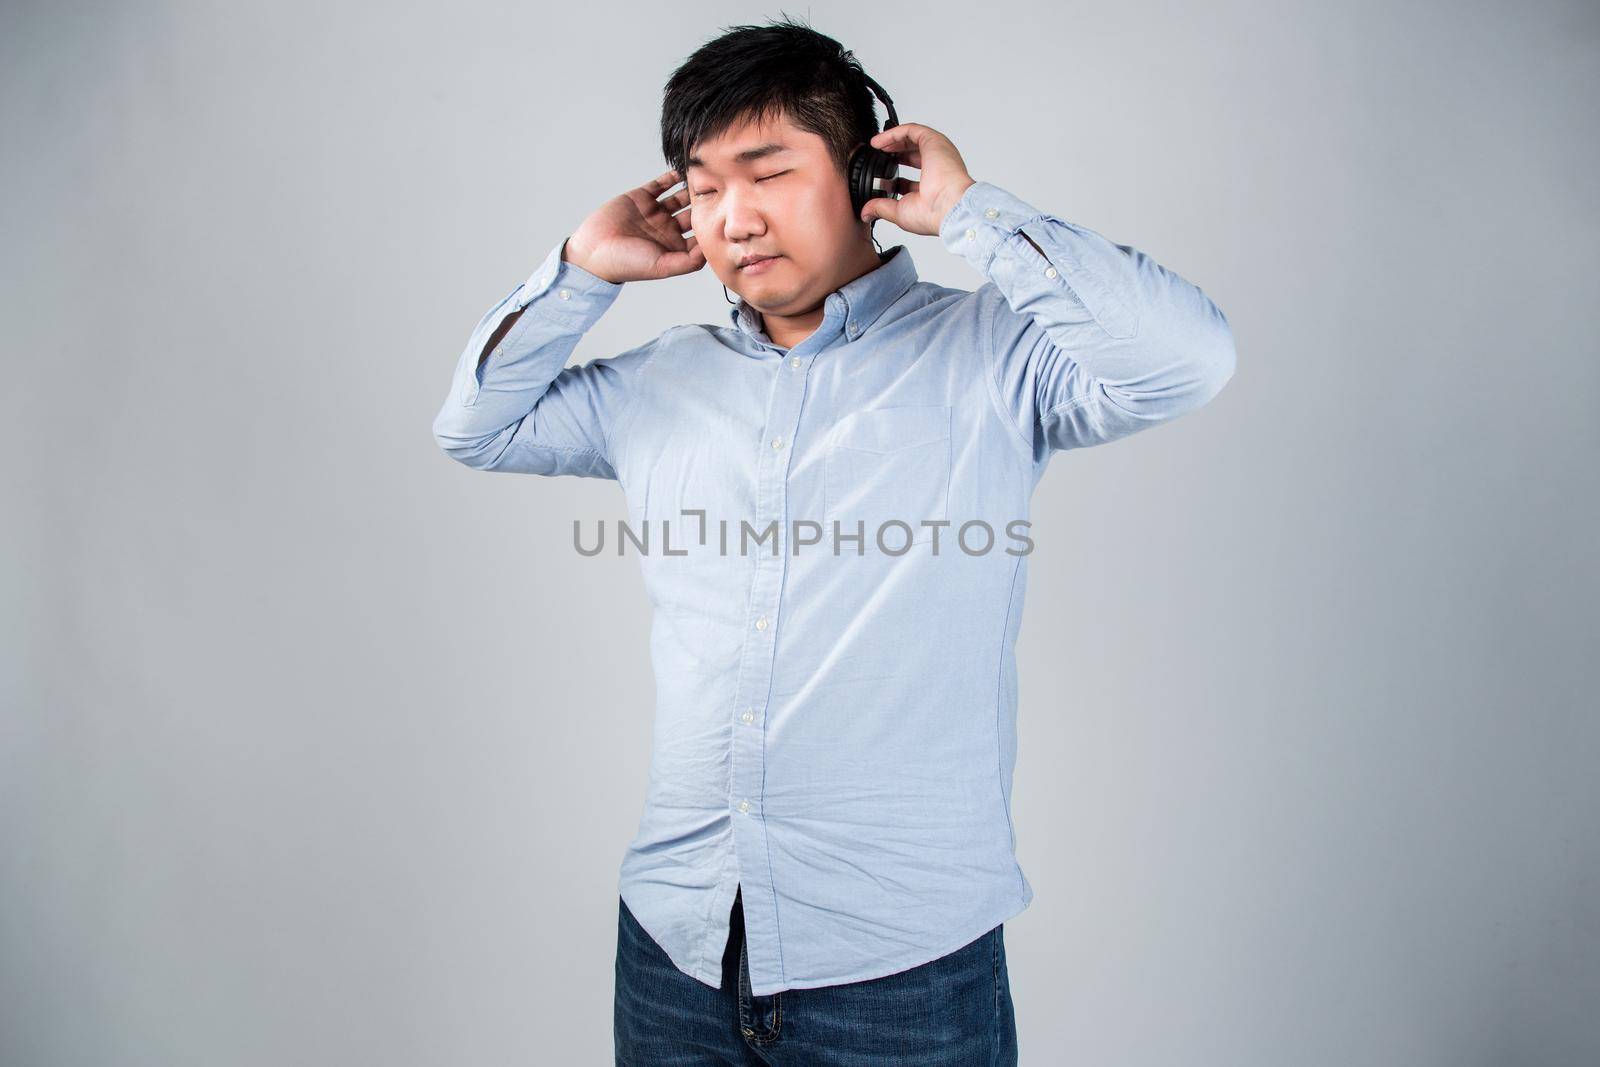 man in headphones holding mobile phone and smiling by whatwolf